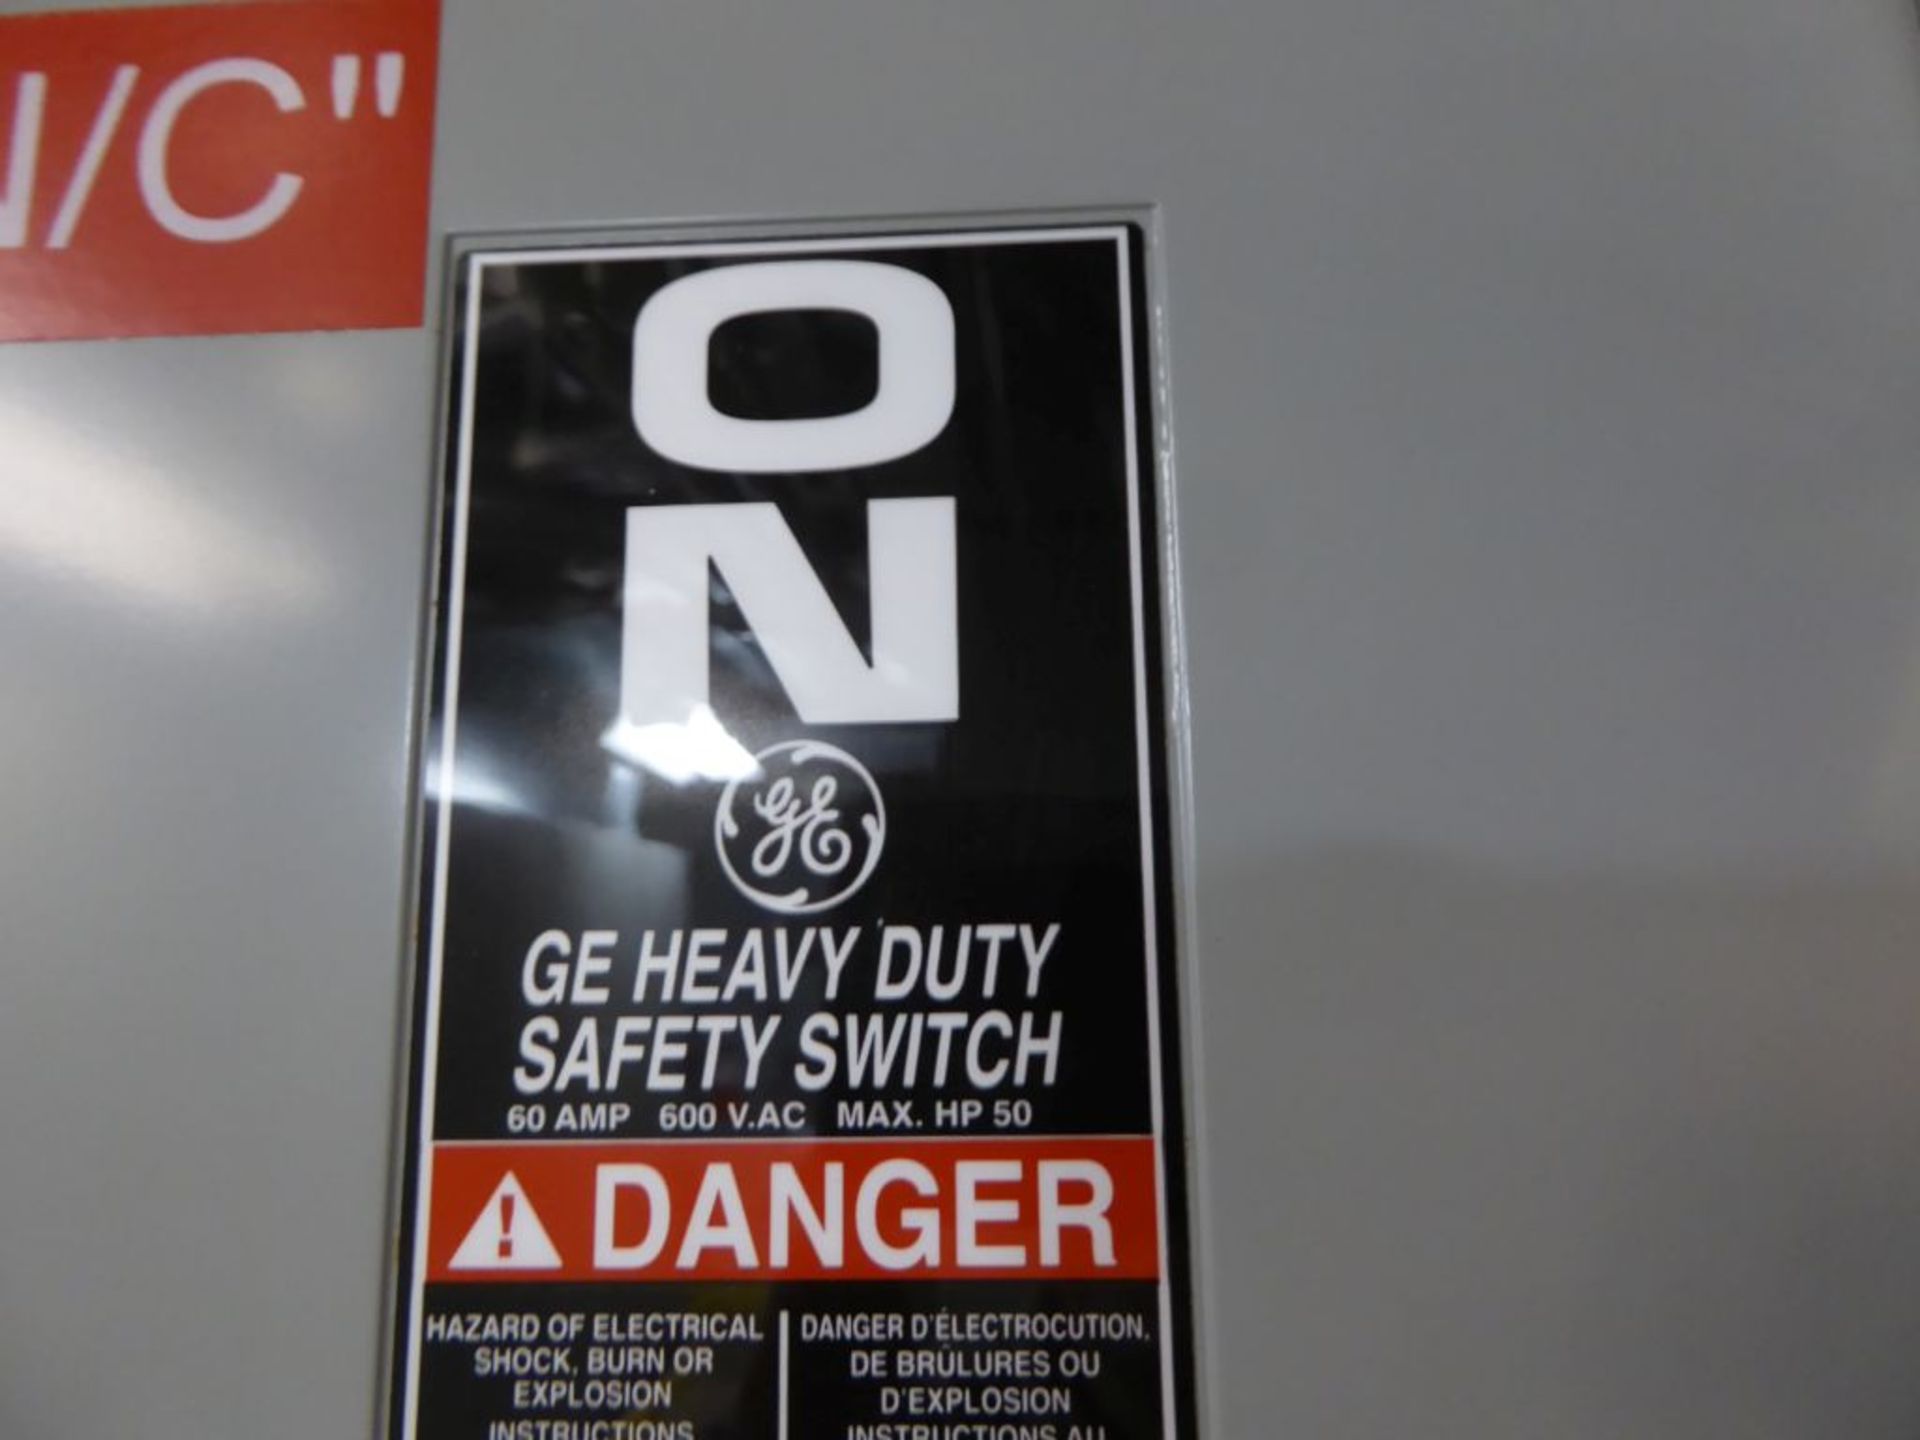 Spartanburg, SC - GE Heavy Duty Safety Switch - Image 2 of 2